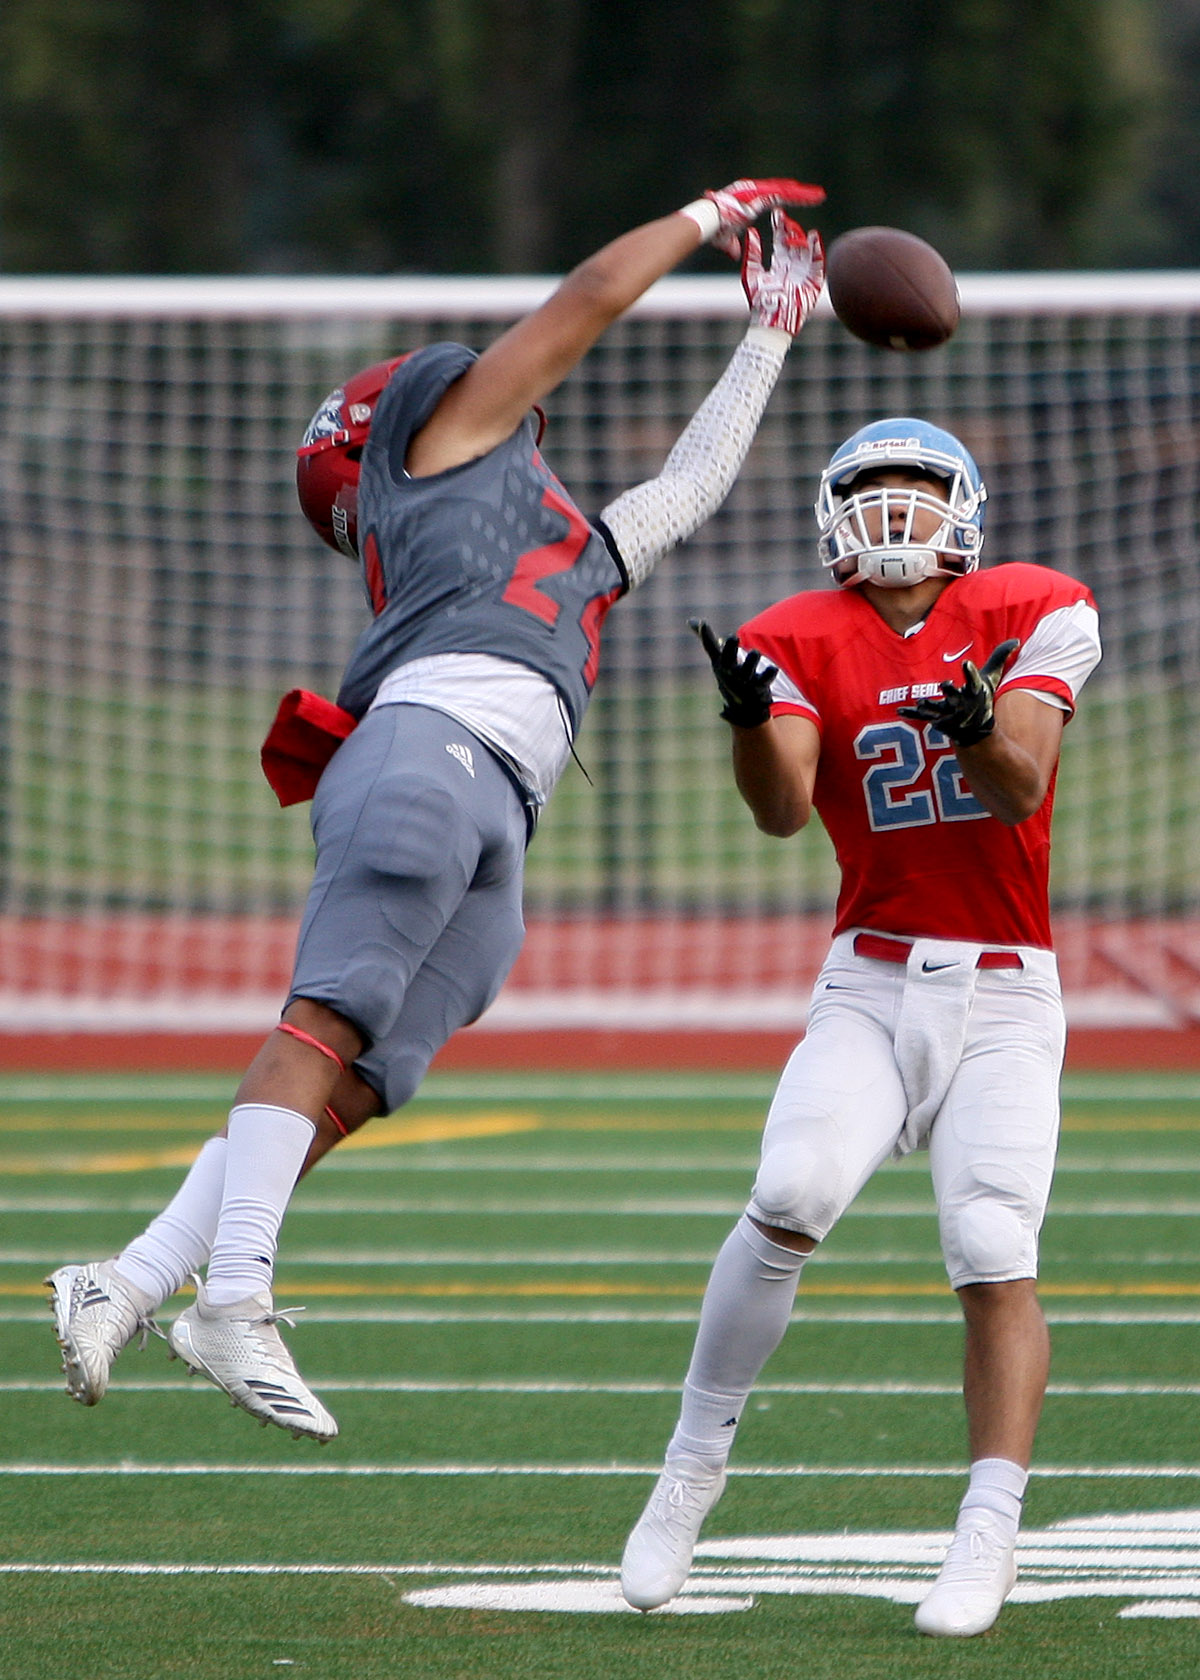 As Jesse Brown of Chief Sealth waits for the ball on a pass Kennedy's Davis Dengah knocks the ball away.